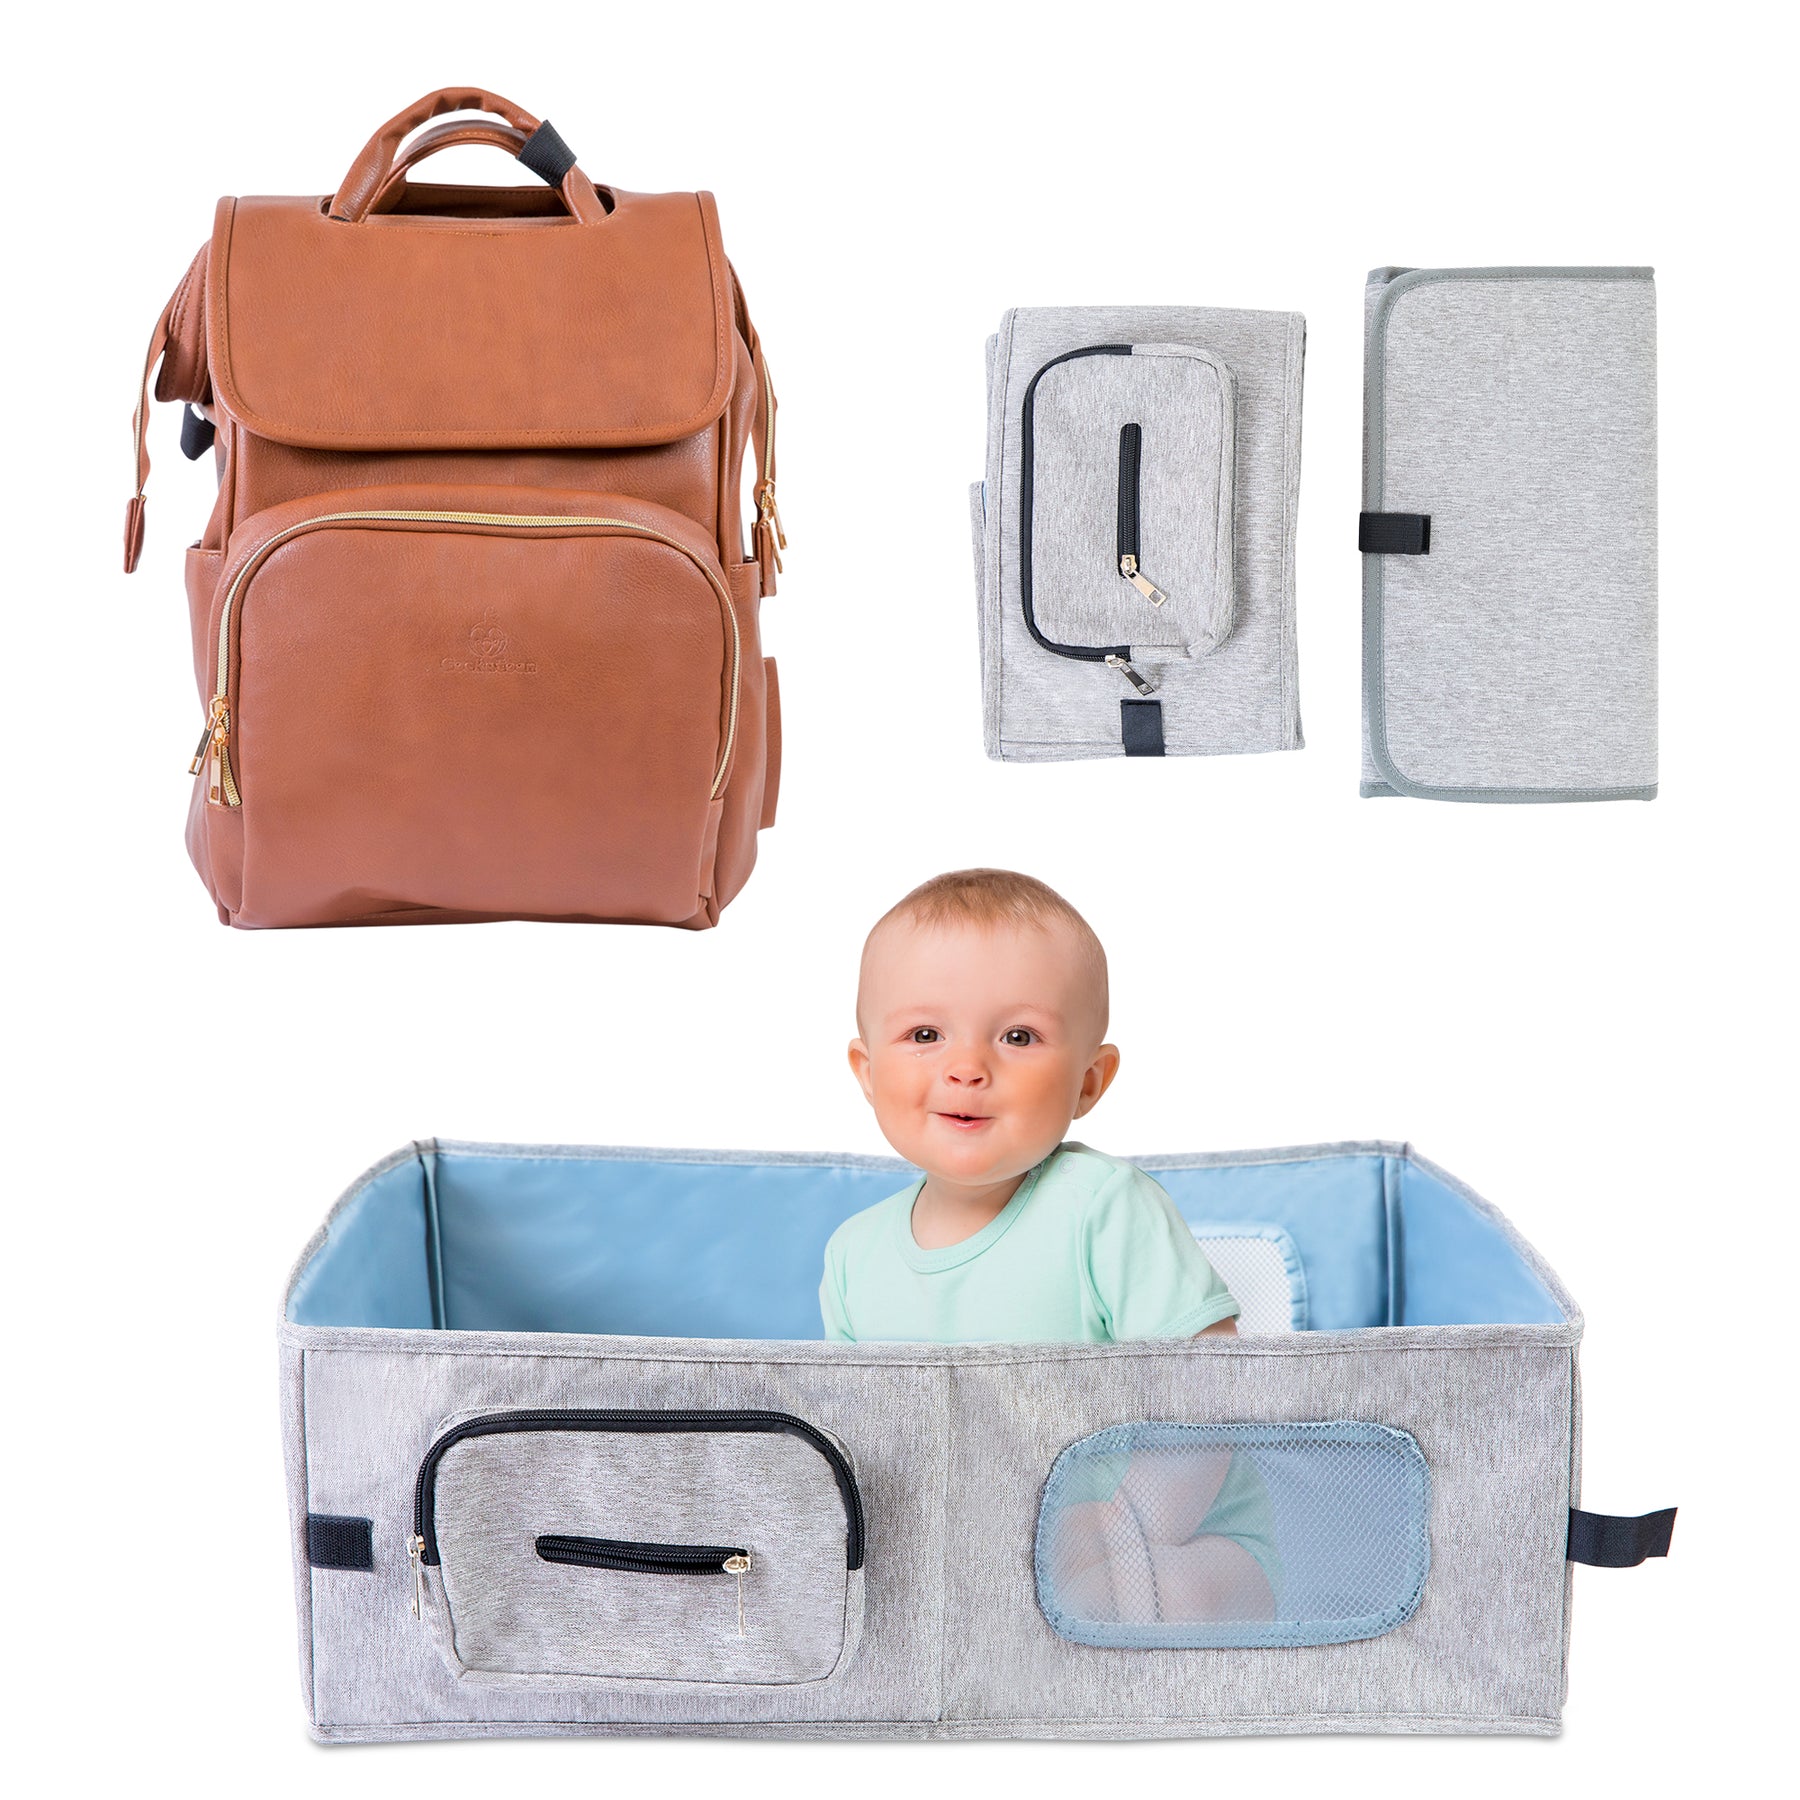 Waterproof Brown Plaid Print Cognac Diaper Bag Backpack For Moms With  Zipper From Coolshoes66, $85.43